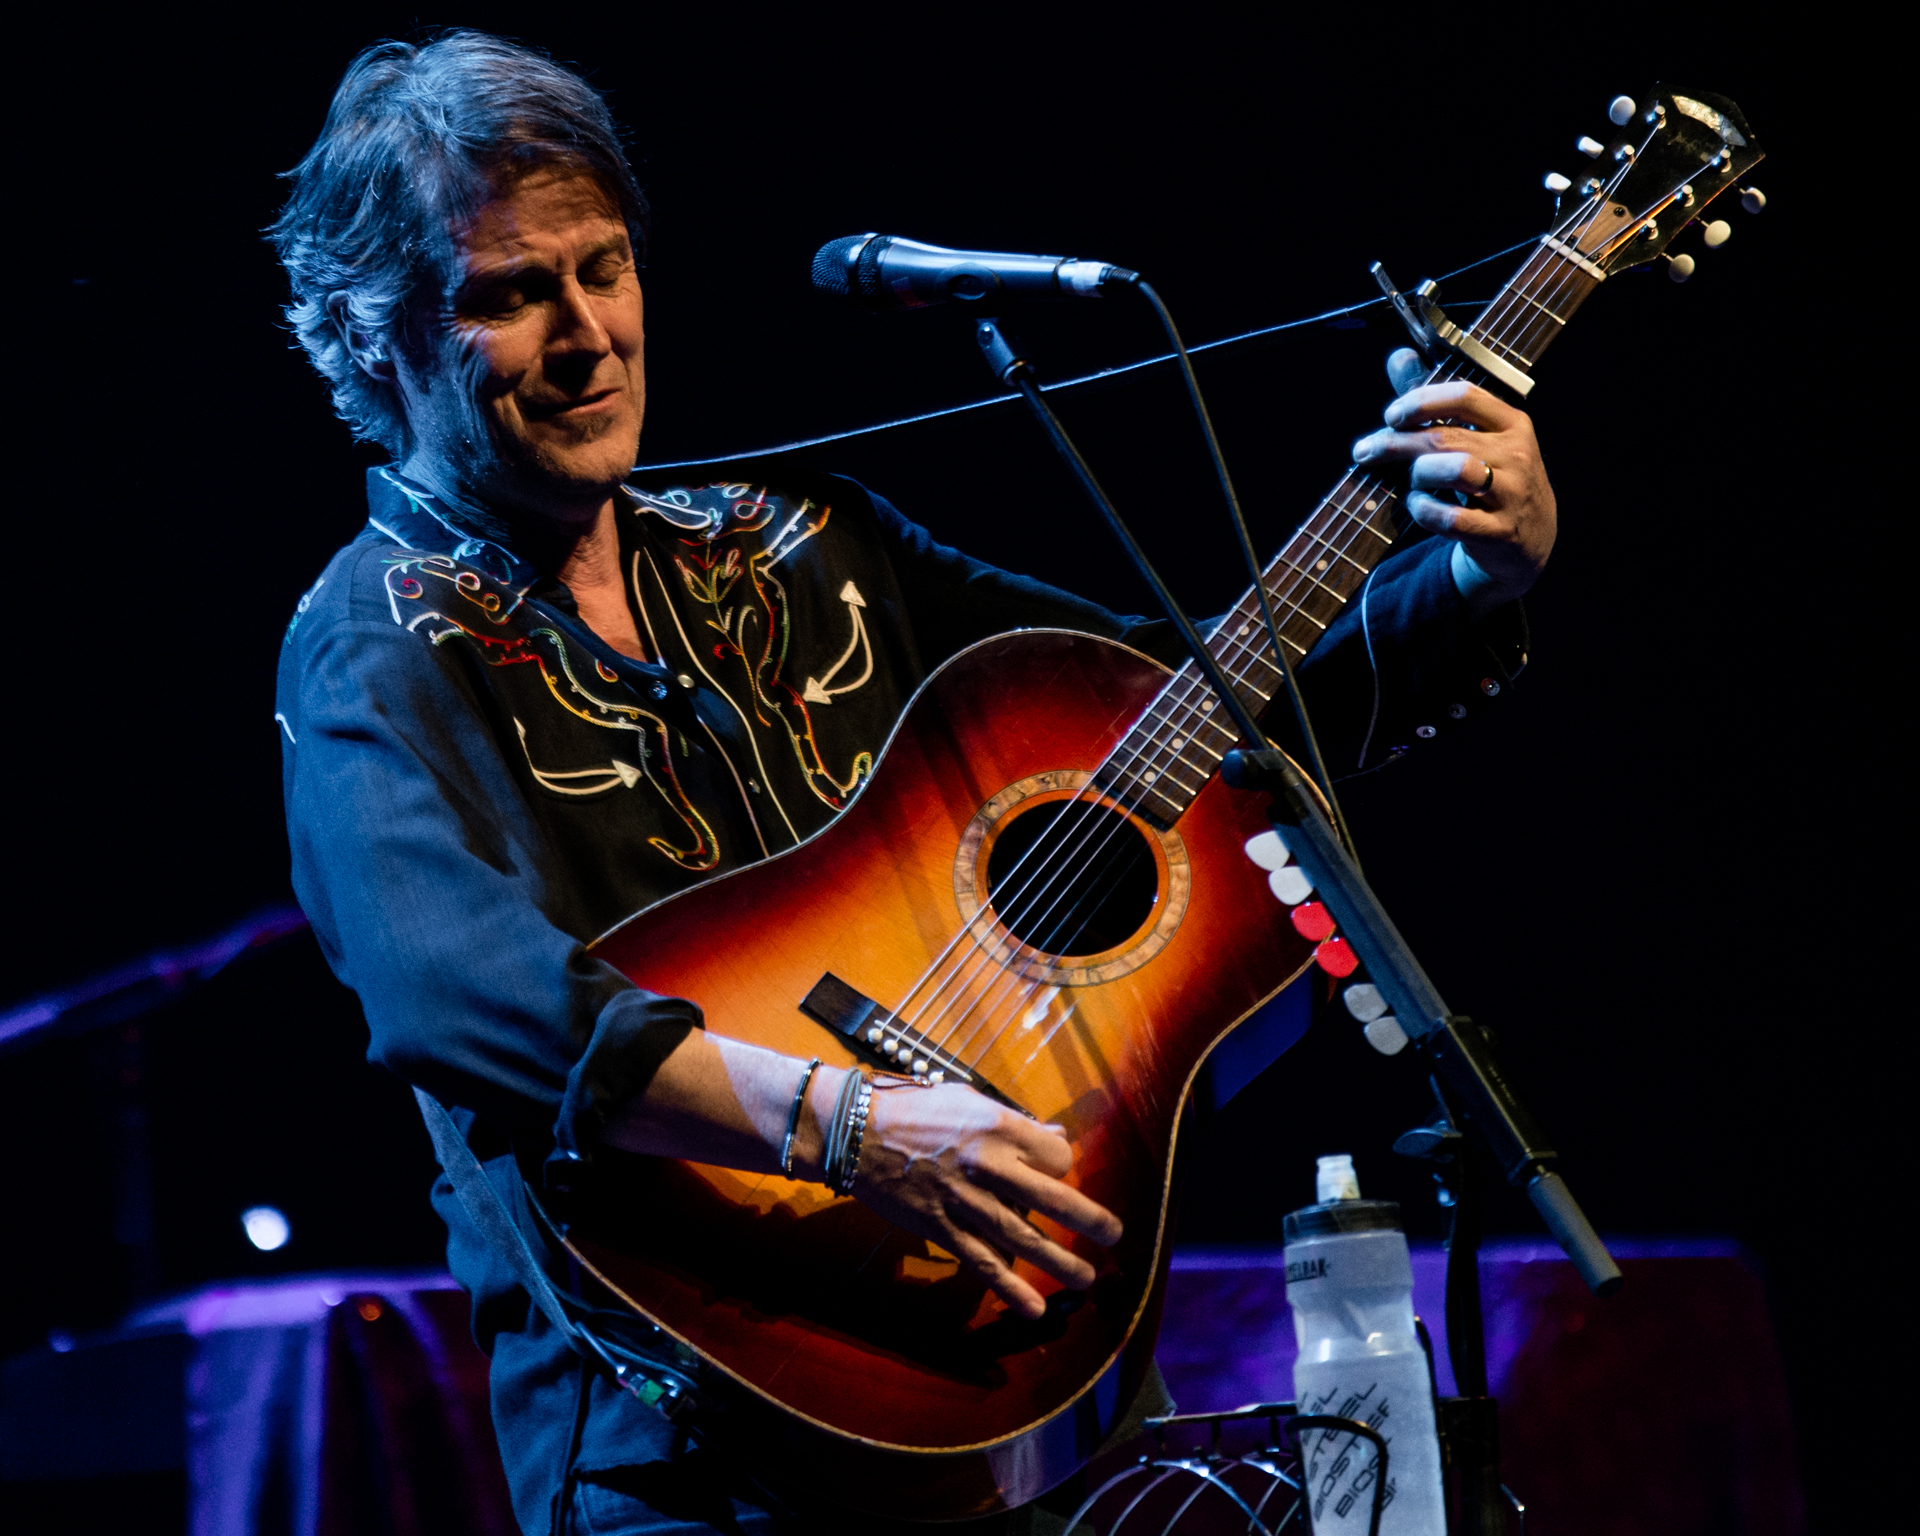 Jim Cuddy commands the stage in a black collared shirt with unique stitching, skillfully playing an acoustic guitar. Notably, his signature water bottle is attached to the microphone stand, a distinctive touch adding a personal flair to the performance. 